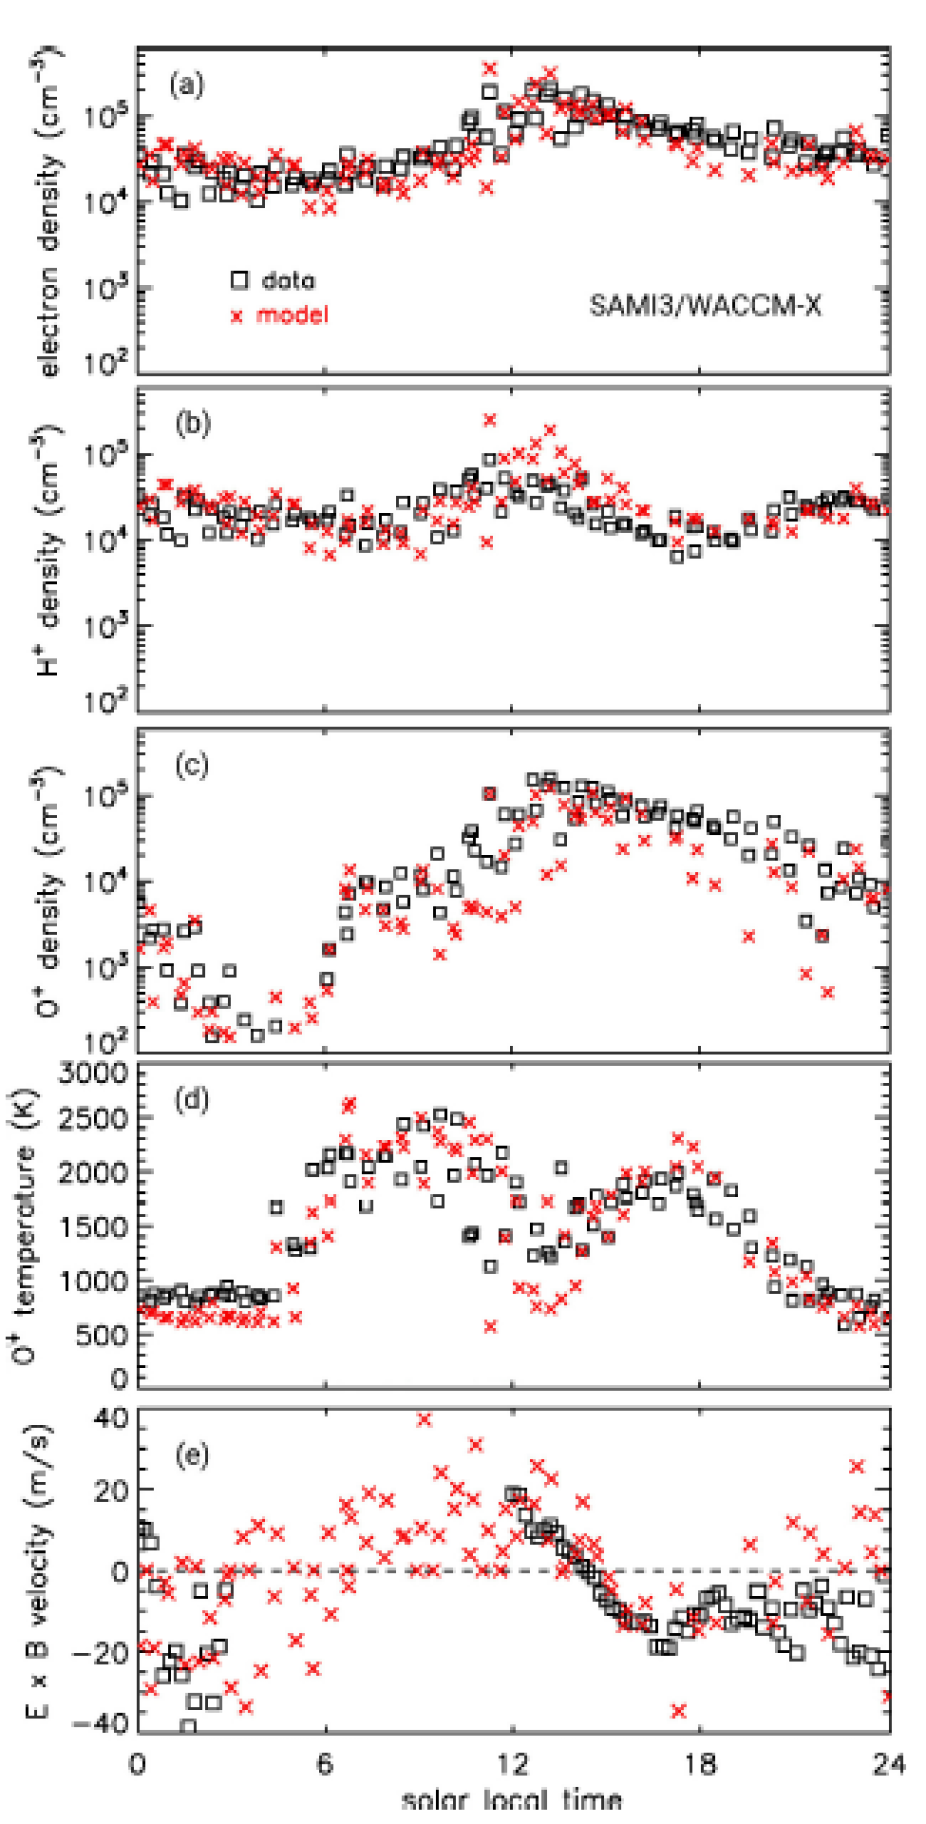 Comparison of observations (black squares) to SAMI3/WACCM-X results (red crosses) 